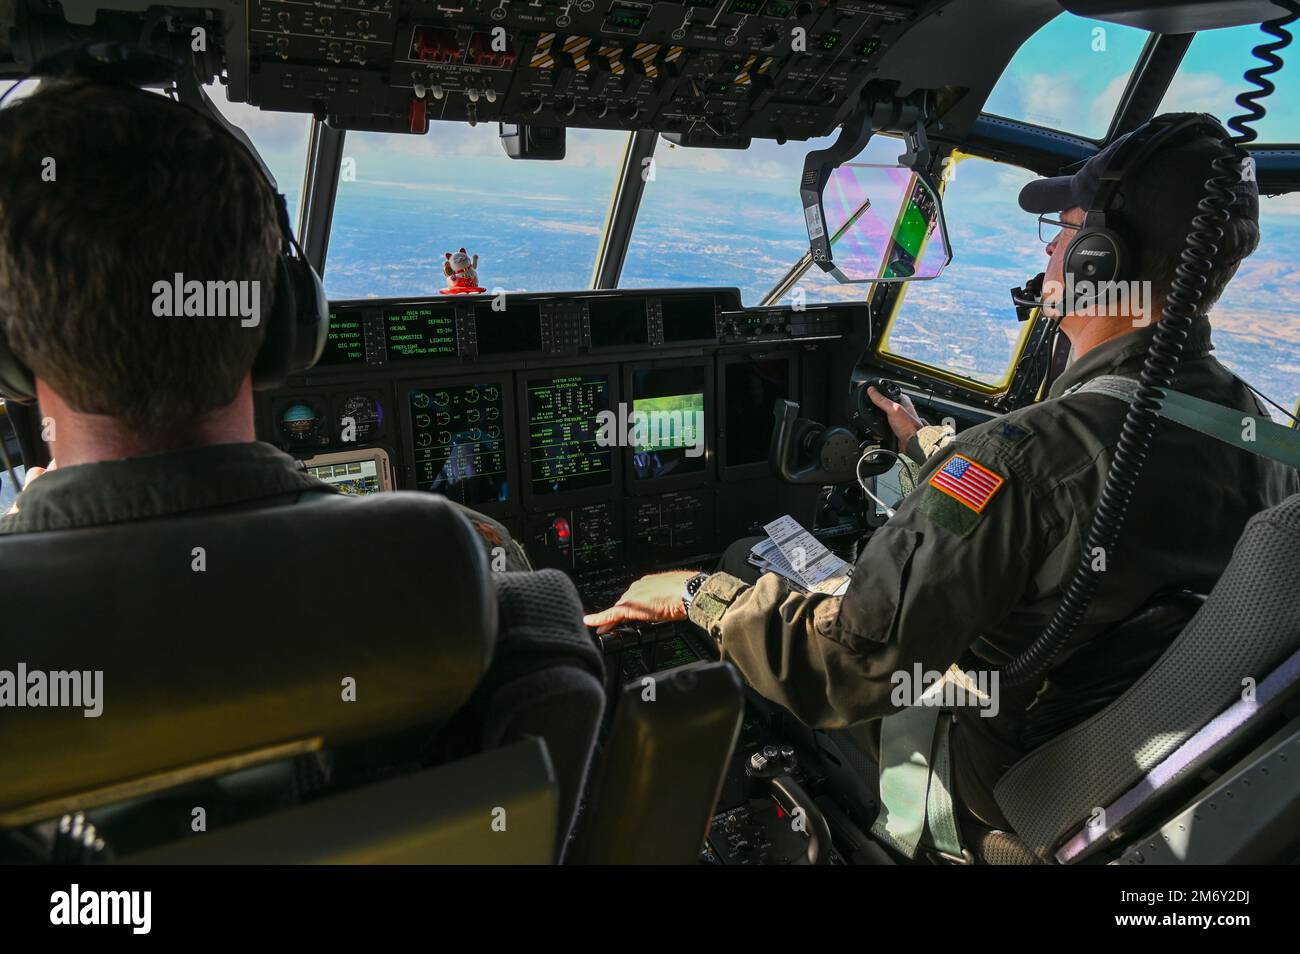 U.S. Air Force Maj. Evan Dineen assigned to the 130th Rescue Squadron and Col. Jeffrey Waldman assigned to the 129th Rescue Wing fly a HC-130J Combat King II to Socorro Island off the coast of Cabo San Lucas, Mexico, May 9, 2022. The crew picked up four pararescuemen from the 131st Rescue Squadron who rescued and medically treated passengers on board a sinking vessel three days prior. (Air National Guard photo by Airman Serena Smith) (This image has been altered to enhance the subject) Stock Photo